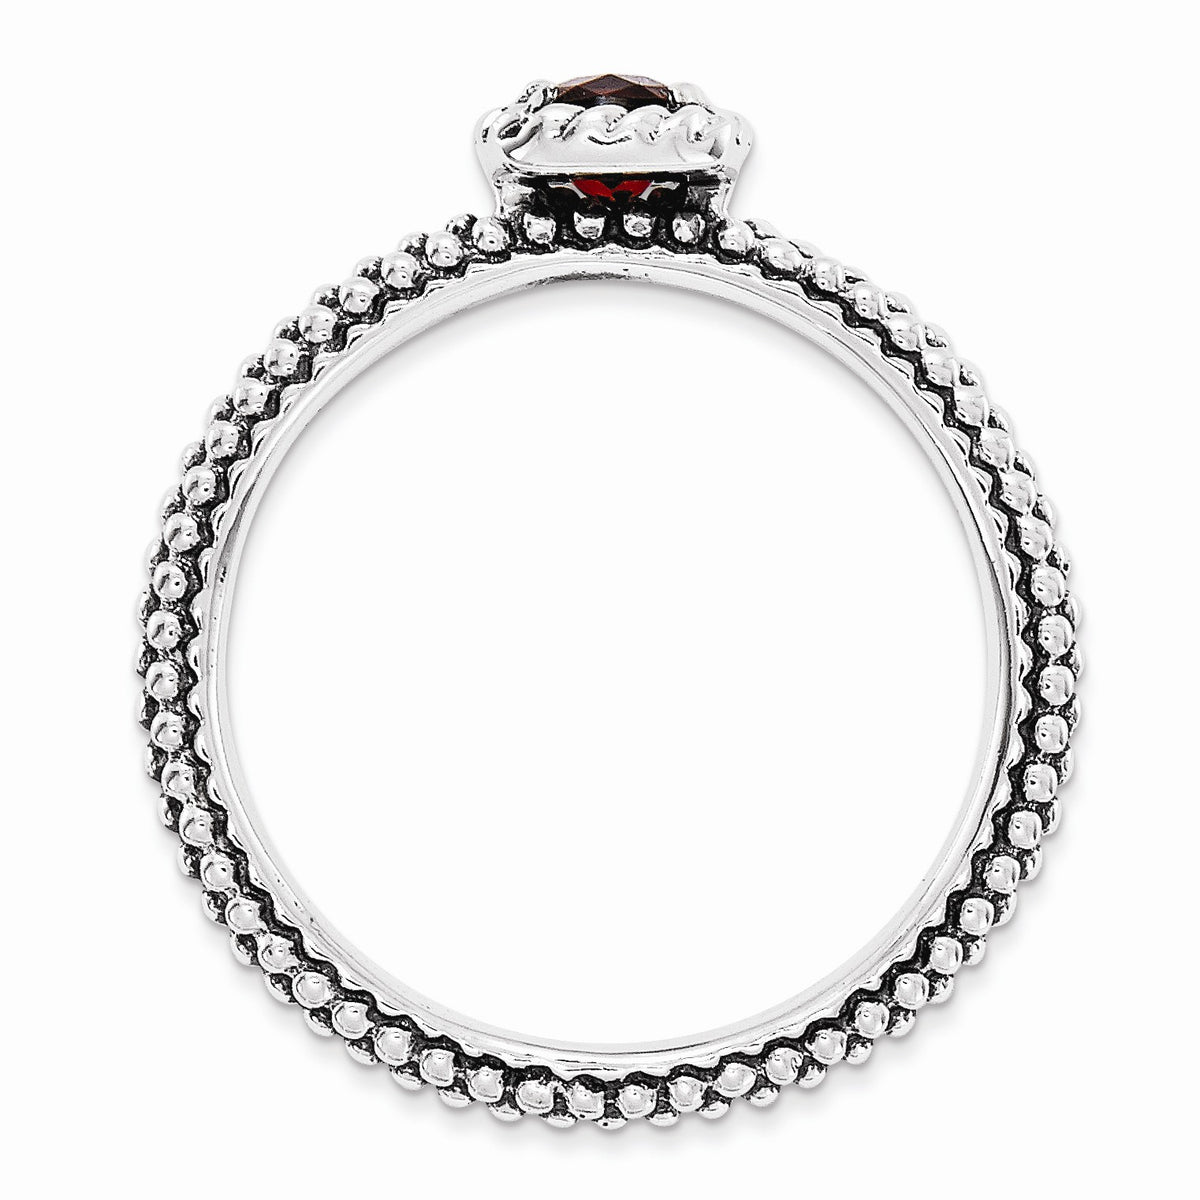 Alternate view of the Sterling Silver &amp; Garnet Solitaire Milgrain Band Stackable Ring by The Black Bow Jewelry Co.